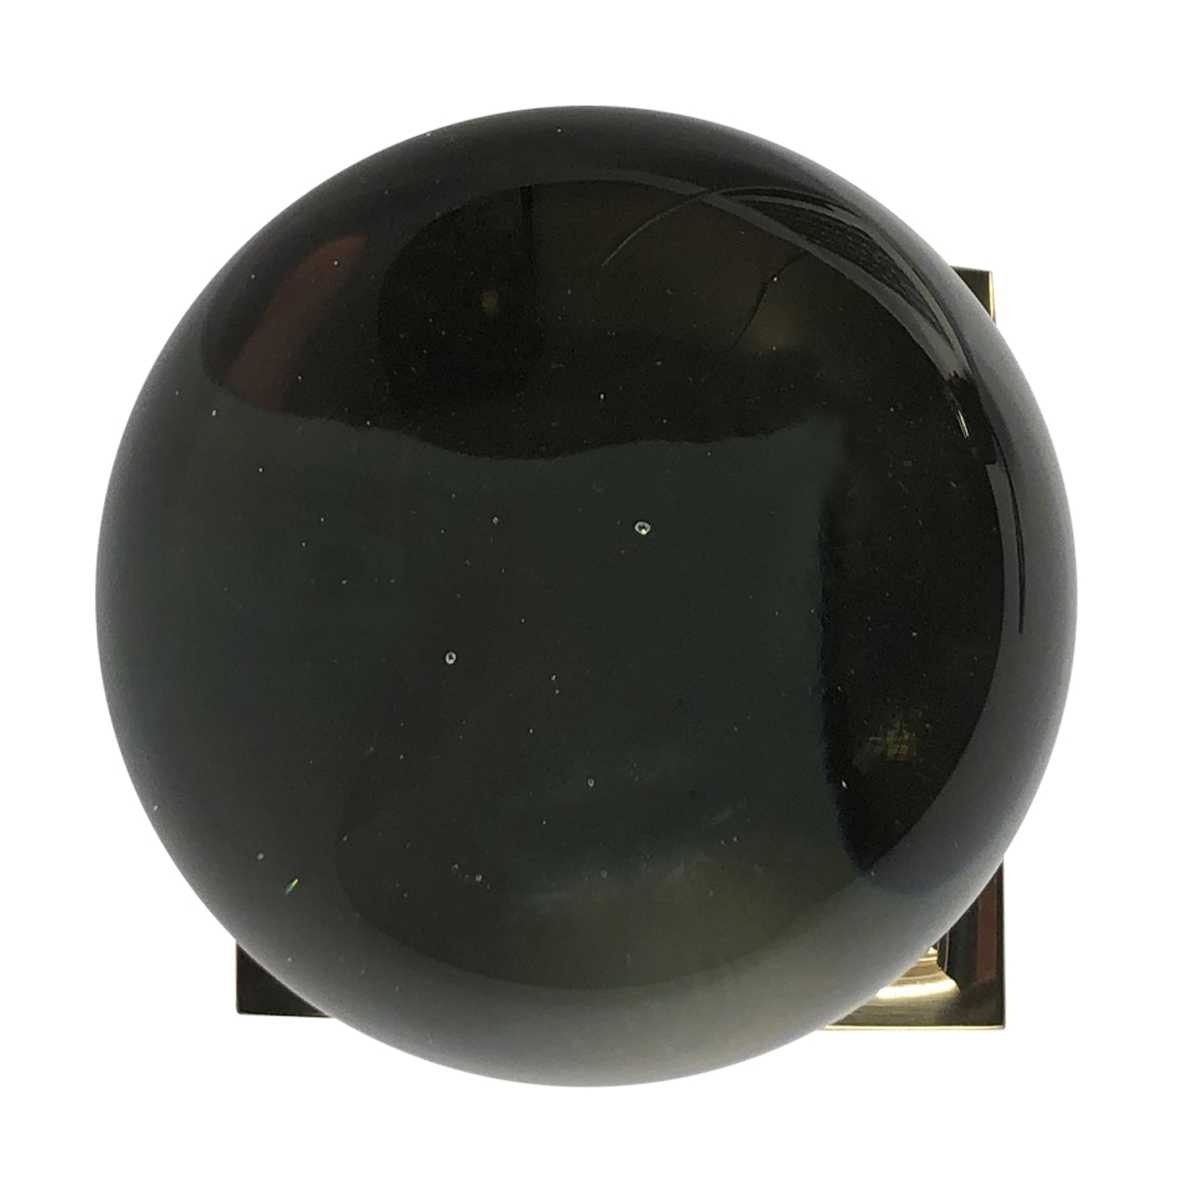 Accessories - Glass Sphere on Brass Stand - Rubbish Interiors Inc.